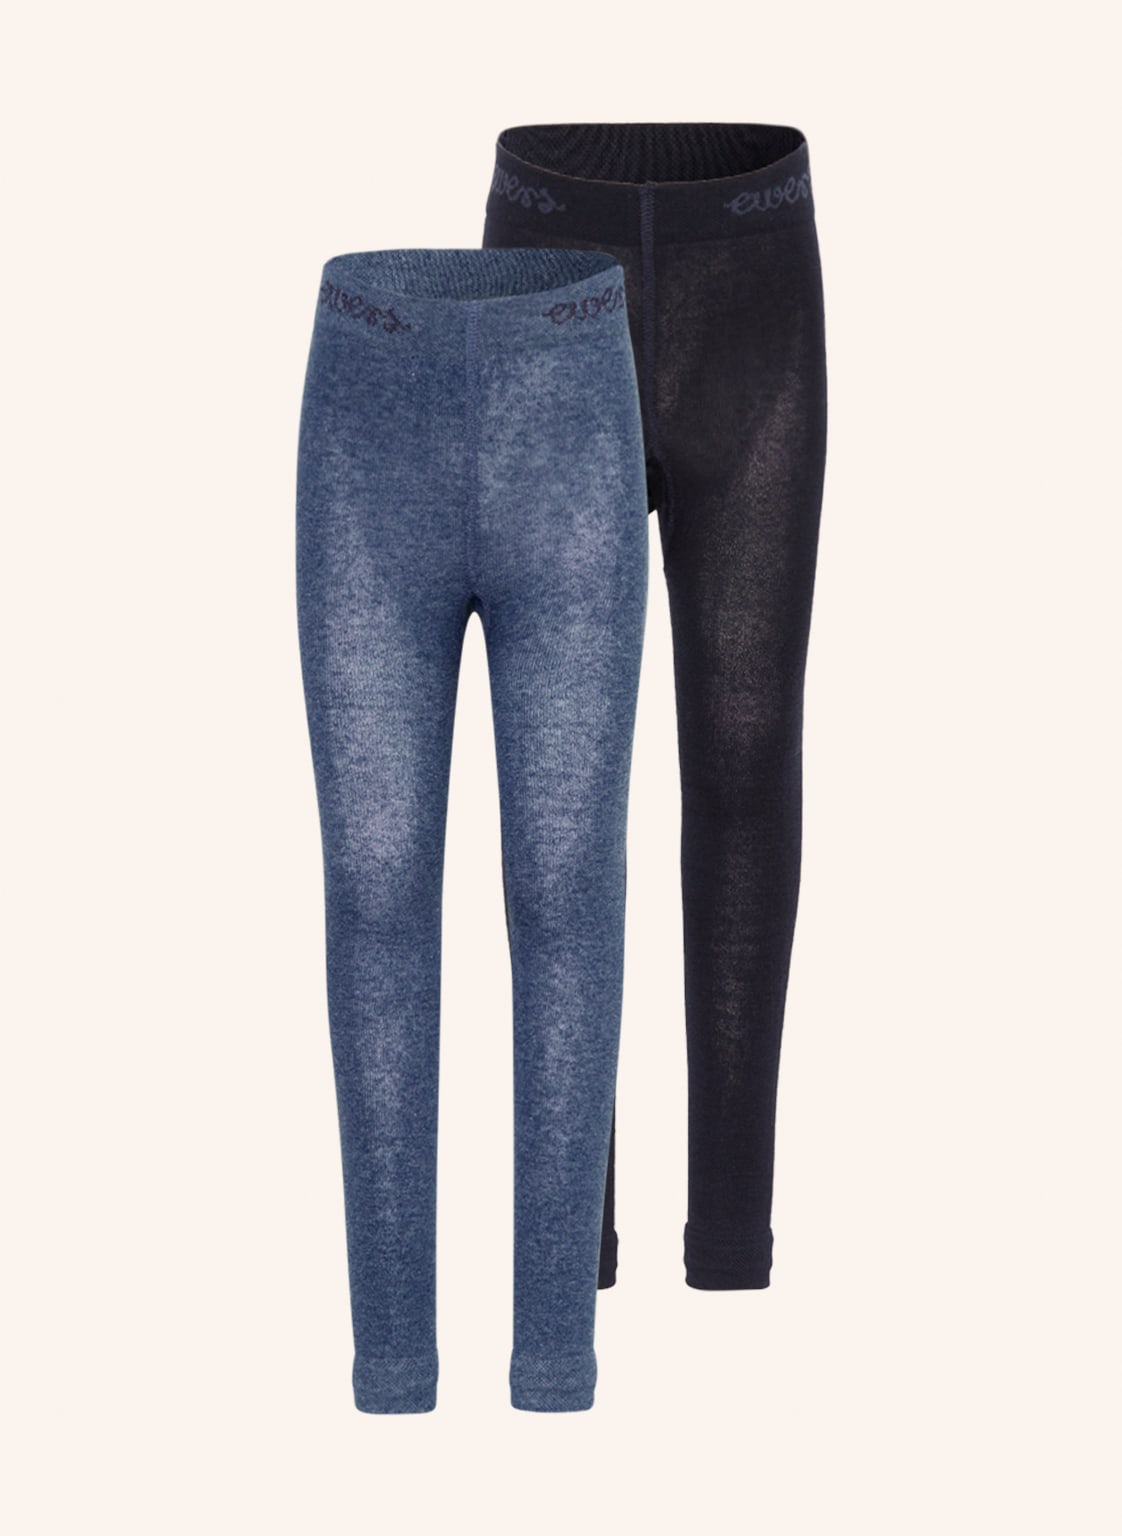 Ewers Collection 2er-Pack Leggings grau von ewers COLLECTION